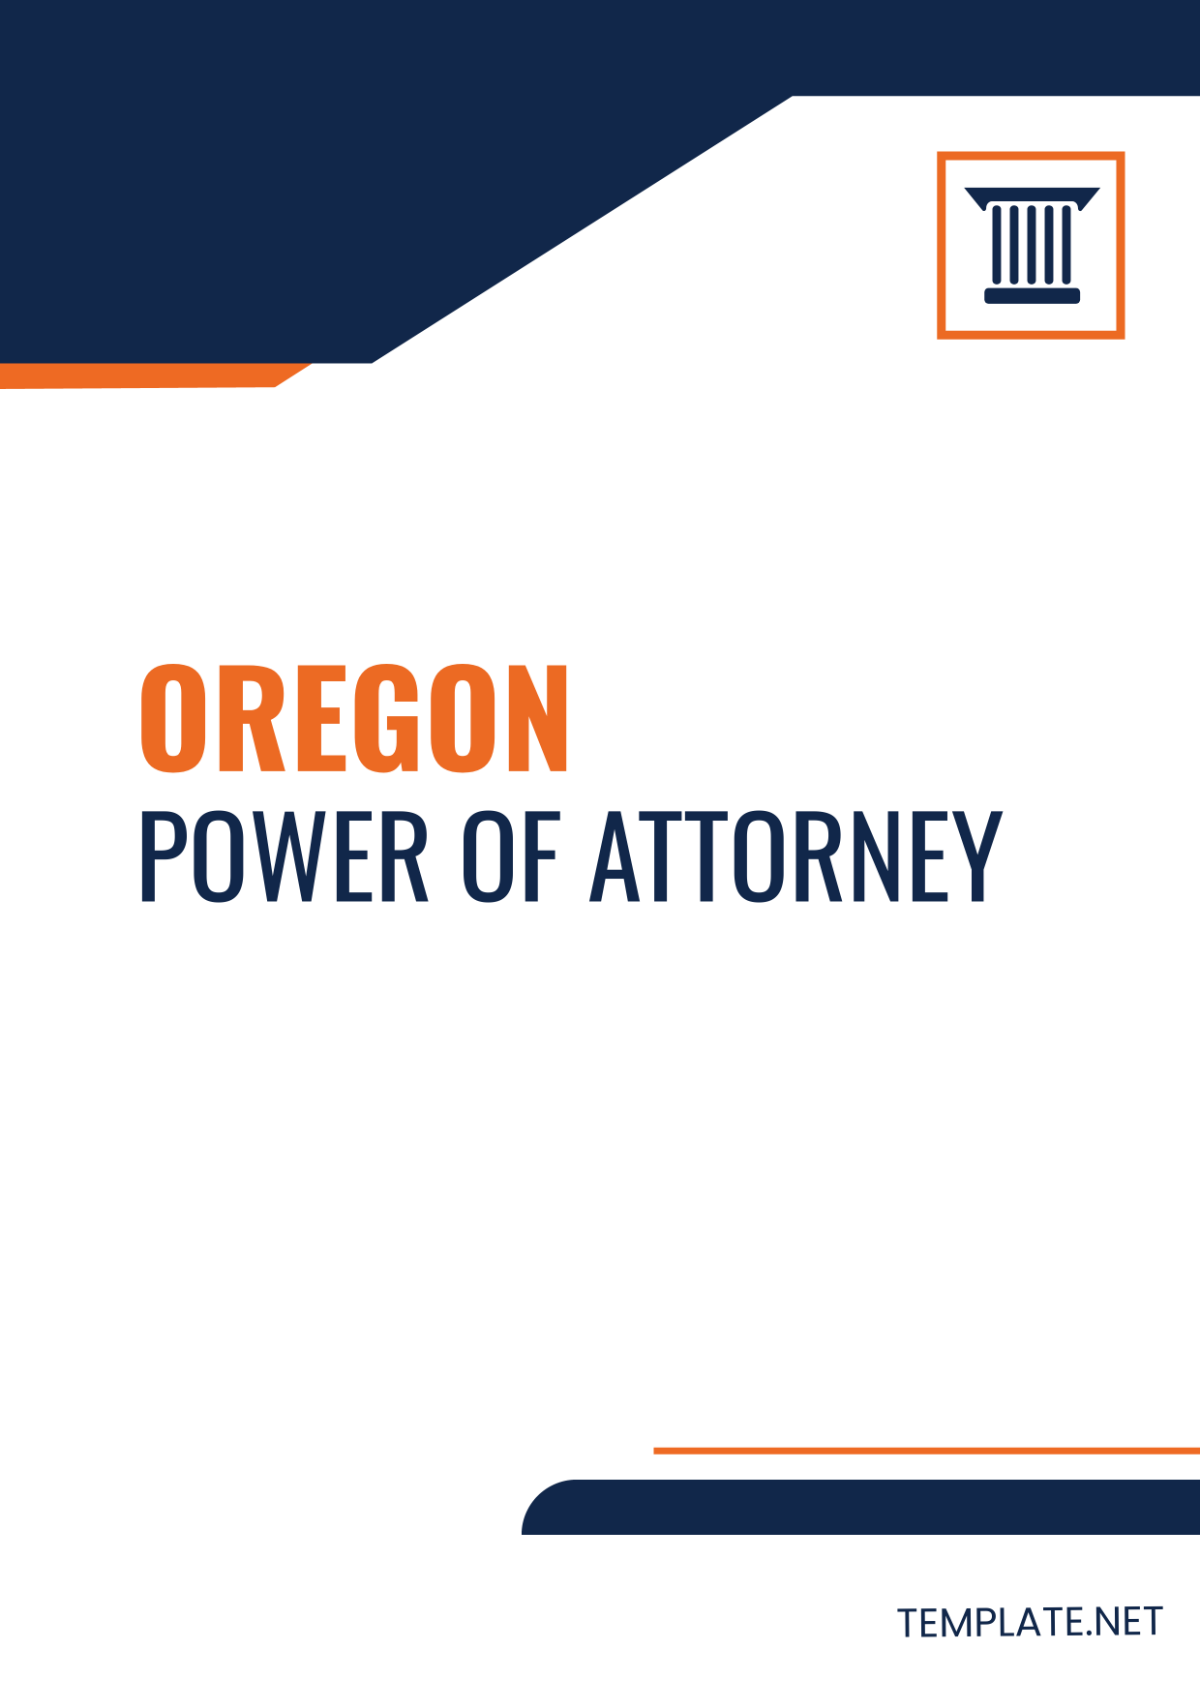 Oregon Tax Power of Attorney Template